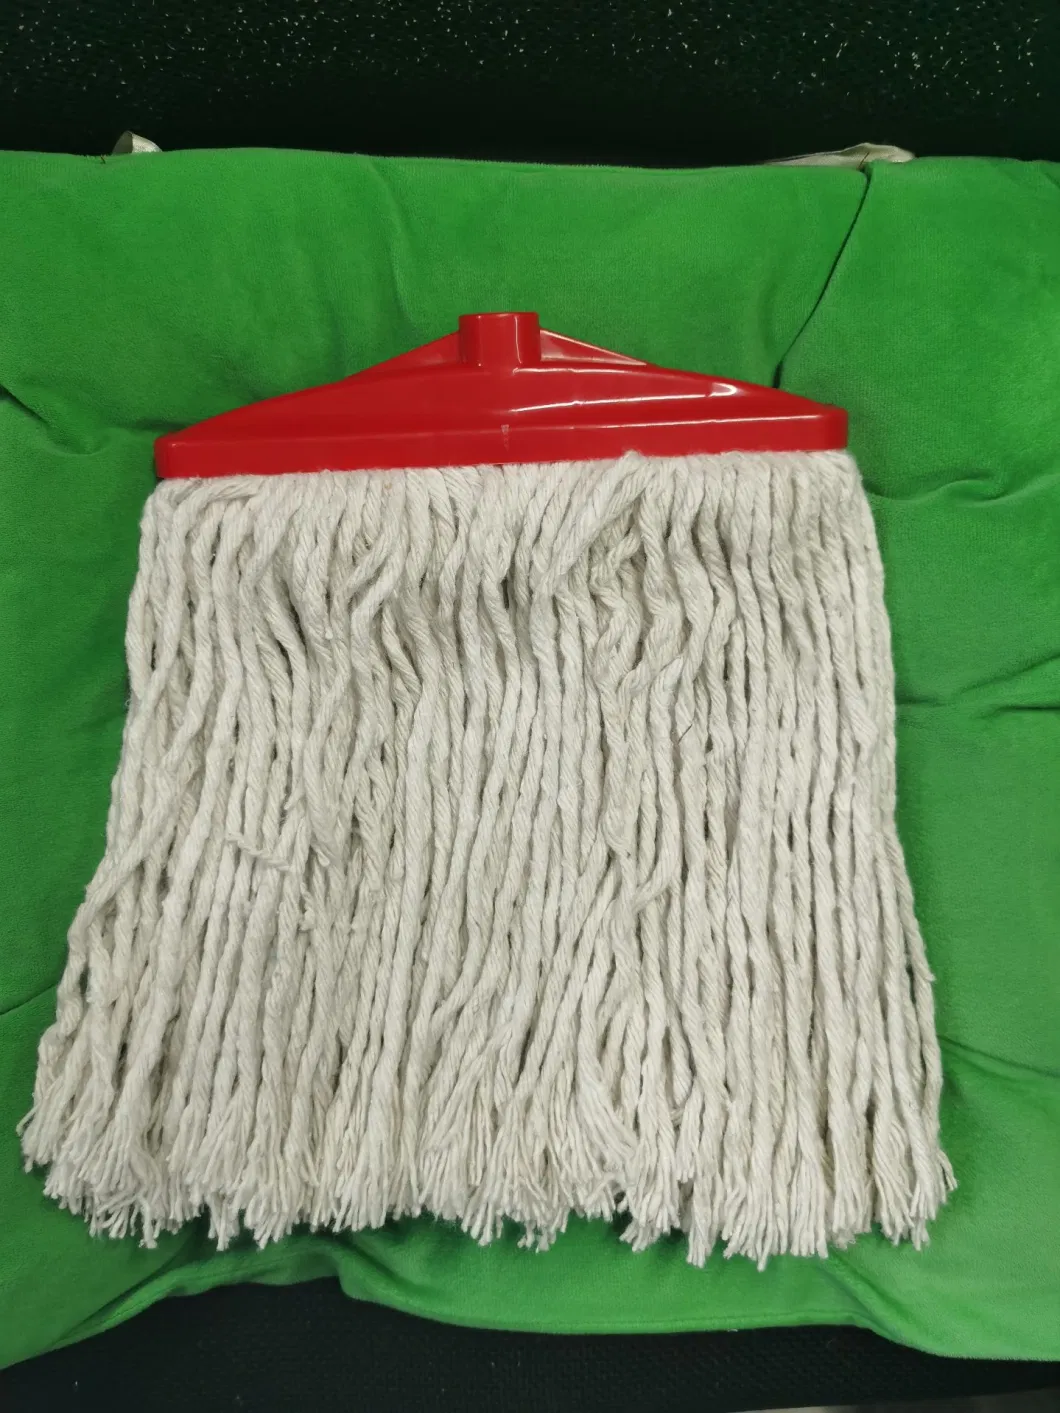 Custom Dry and Wet Round Mop Straight Factory, Microfiber Cotton Yarn Mop Head